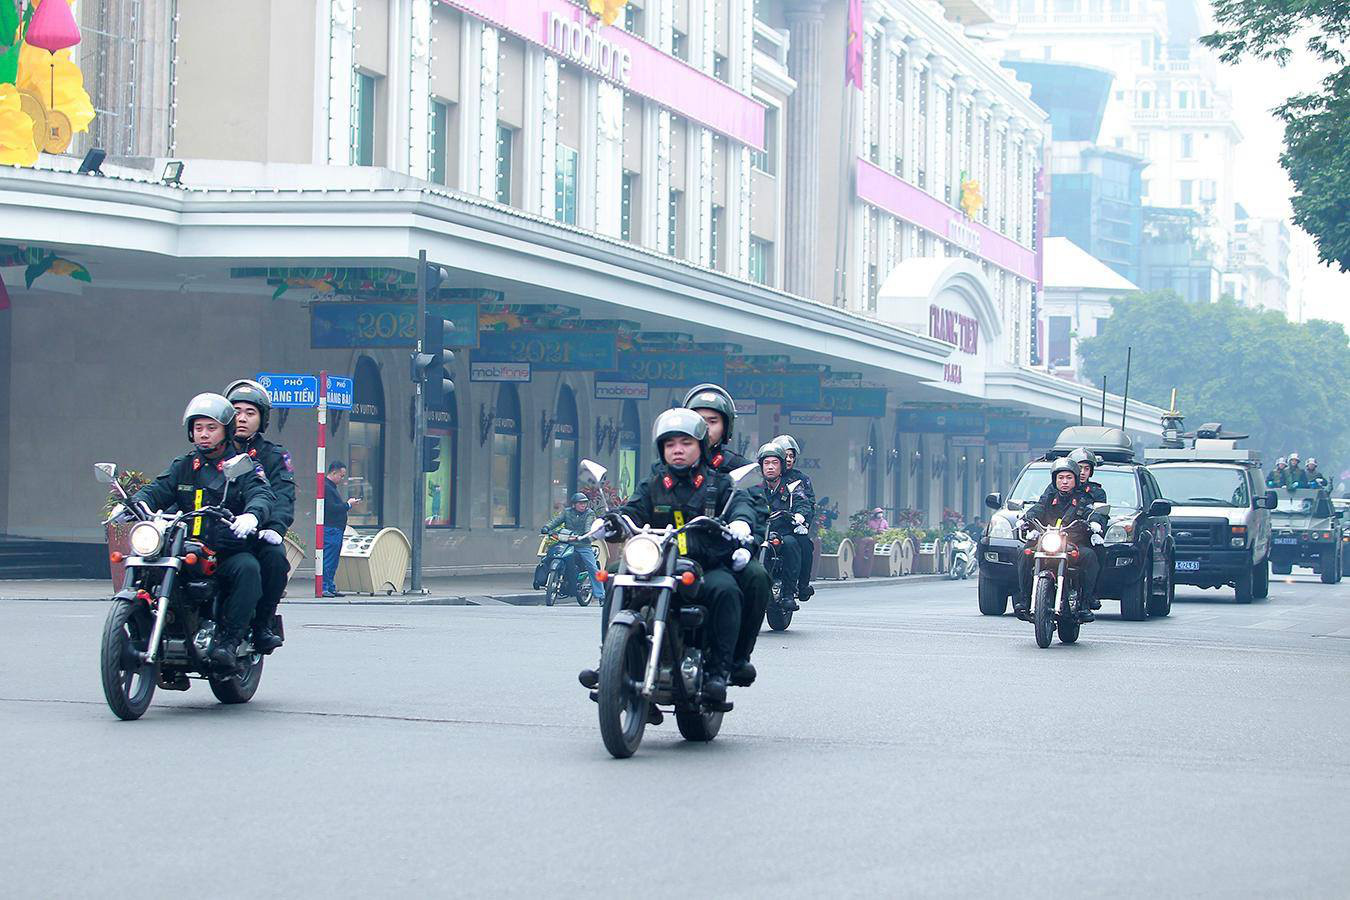 Officers under the Hanoi Department of Public Security patrol on a street following the ceremony on January 20, 2021. Photo: D. Le / Tuoi Tre